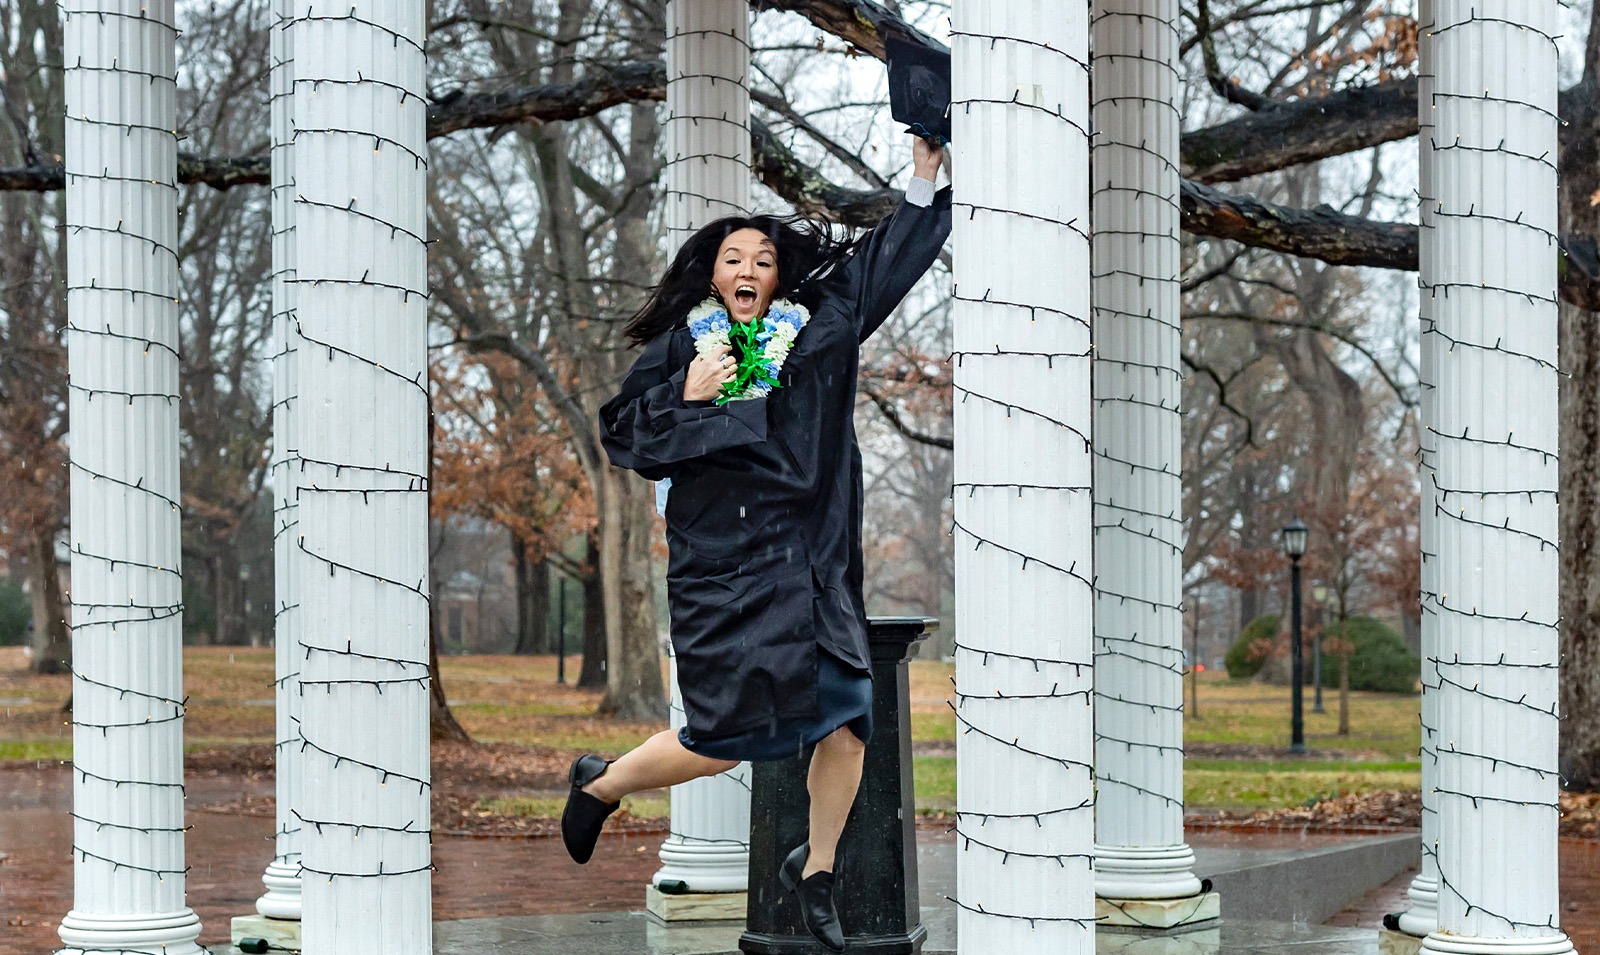 A graduate jumping up in the air and smiling in front of the Old Well.